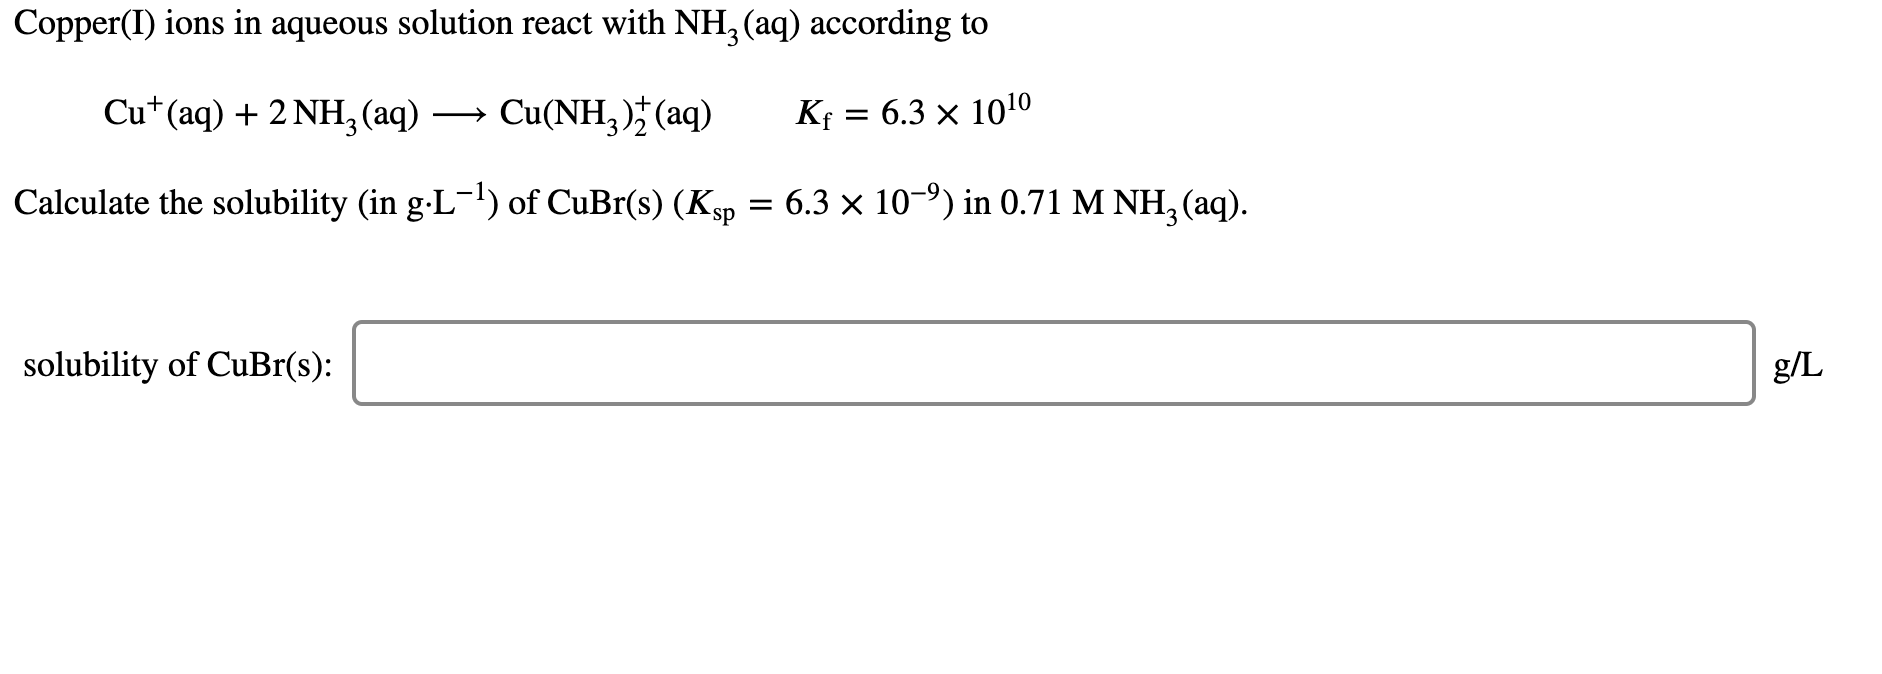 Copper(I) ions in aqueous solution react with NH, (aq) according to
Cu*(aq) + 2 NH,(aq)
Cu(NH, )* (aq)
Kf = 6.3 x 1010
Calculate the solubility (in g-L-) of CuBr(s) (Ksp = 6.3 × 10-9) in 0.71 M NH, (aq).
solubility of CuBr(s):
g/L
